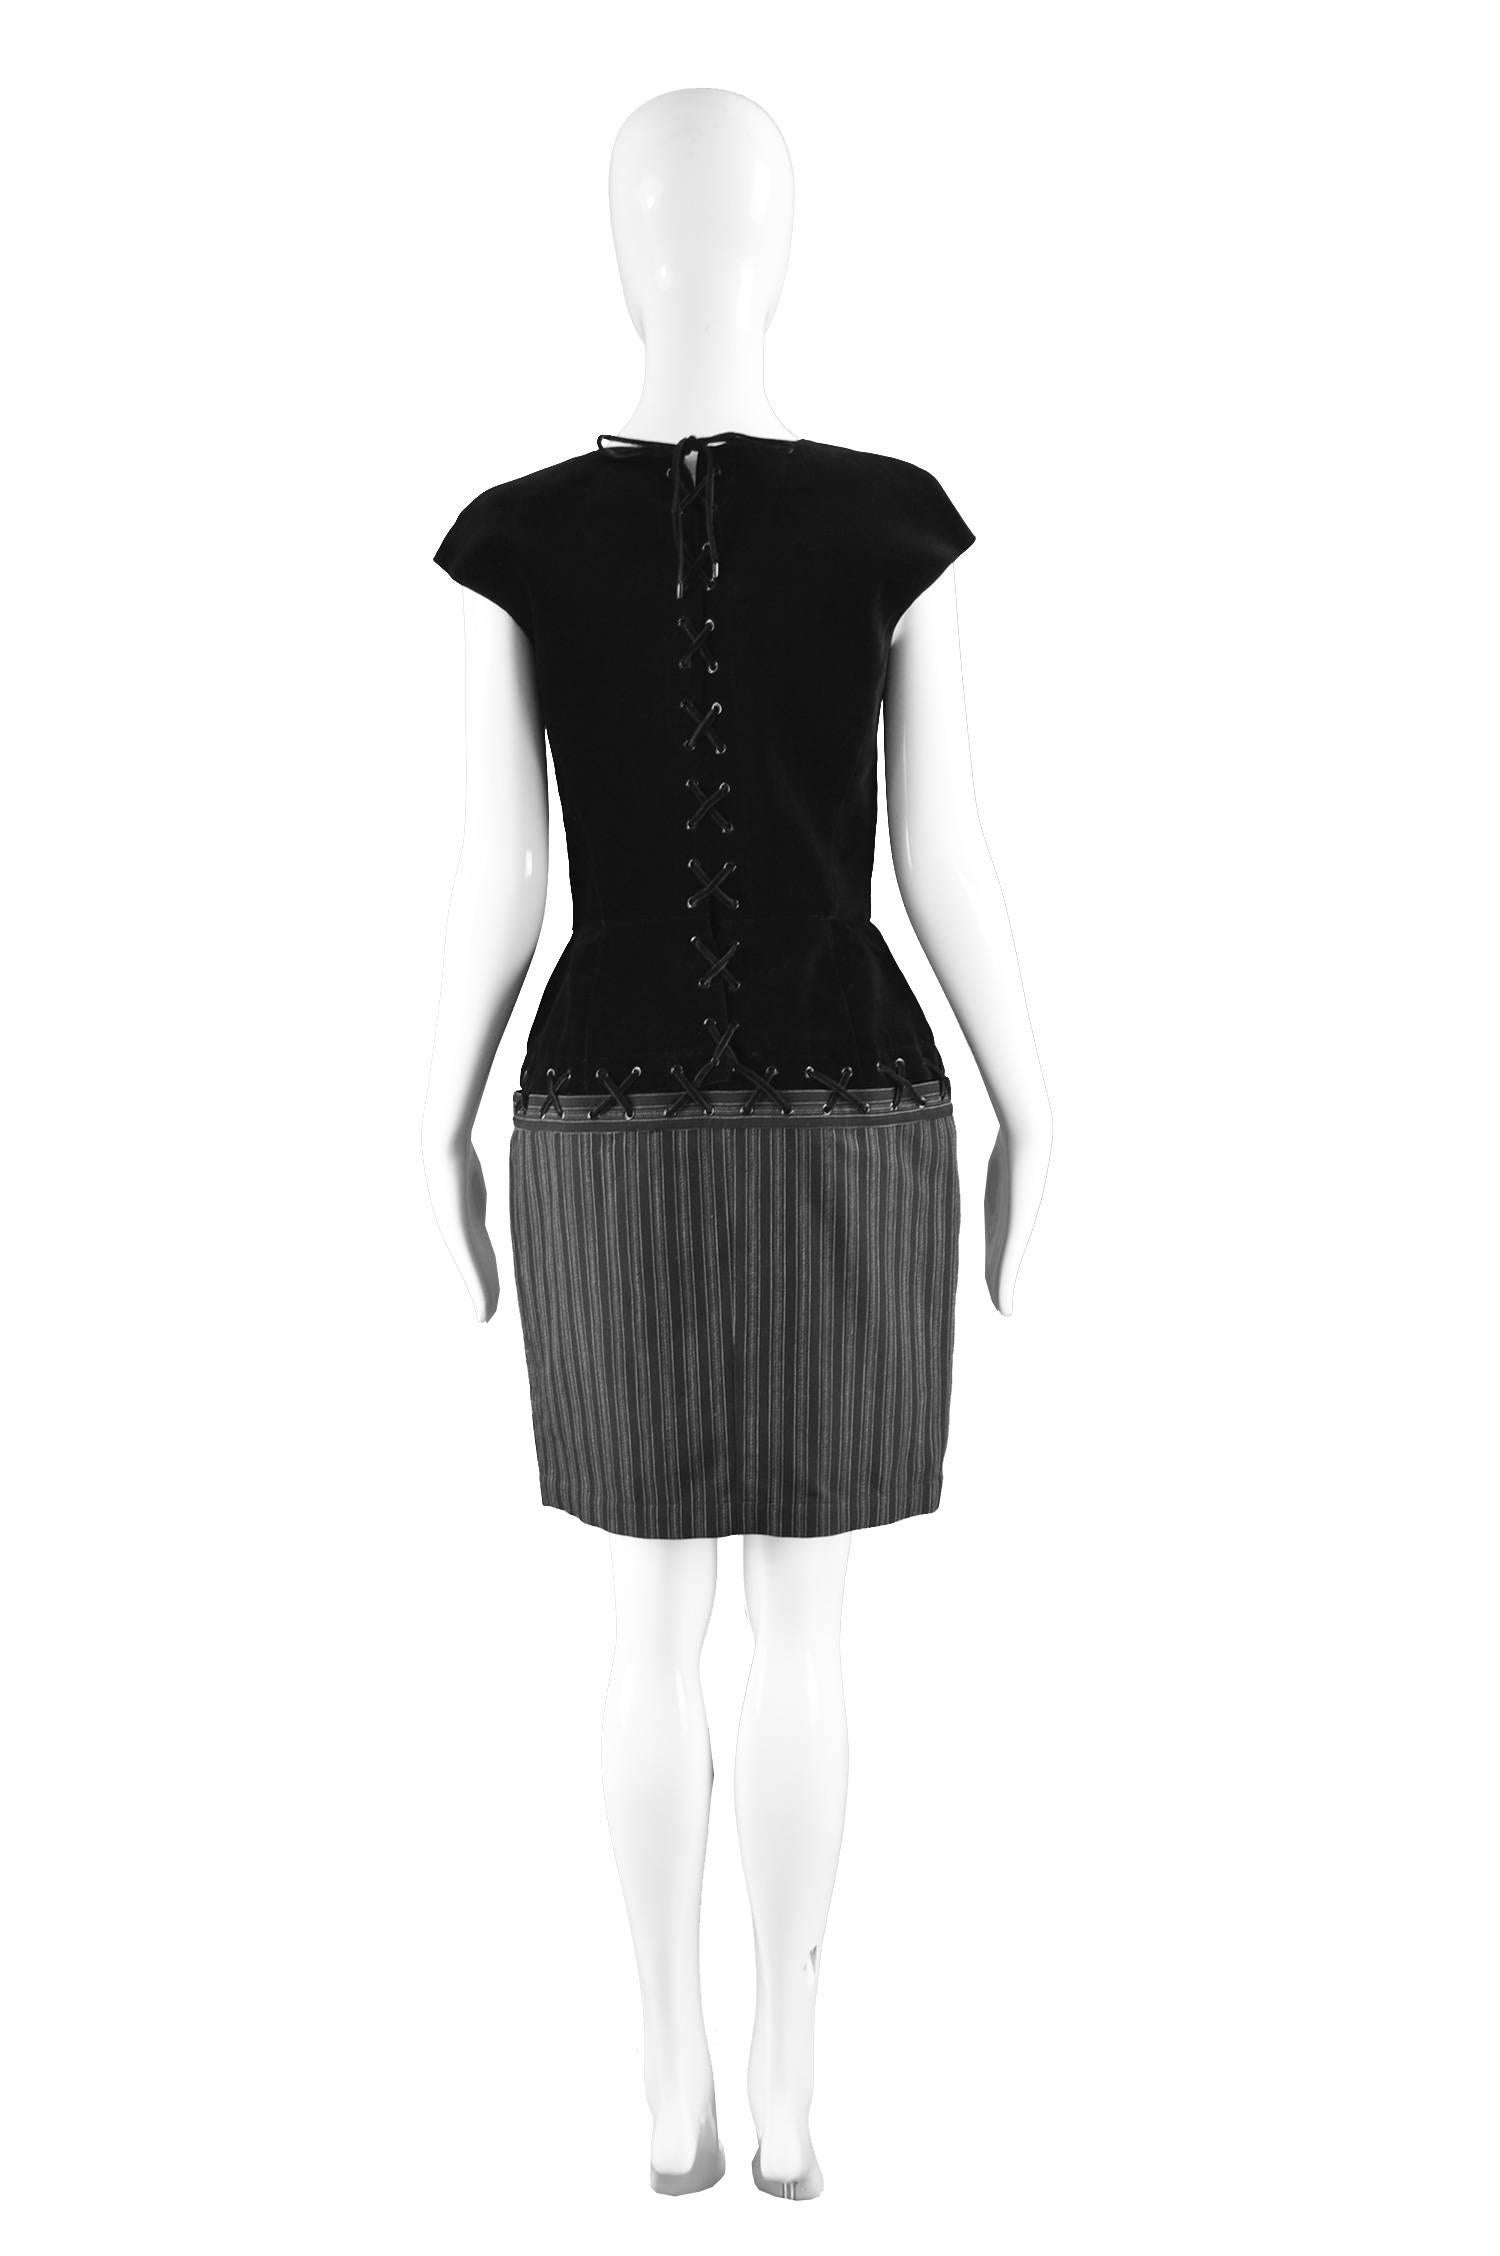 Women's Thierry Mugler Vintage Black Velvet and Striped Wool Corset Style Dress, 1990s For Sale